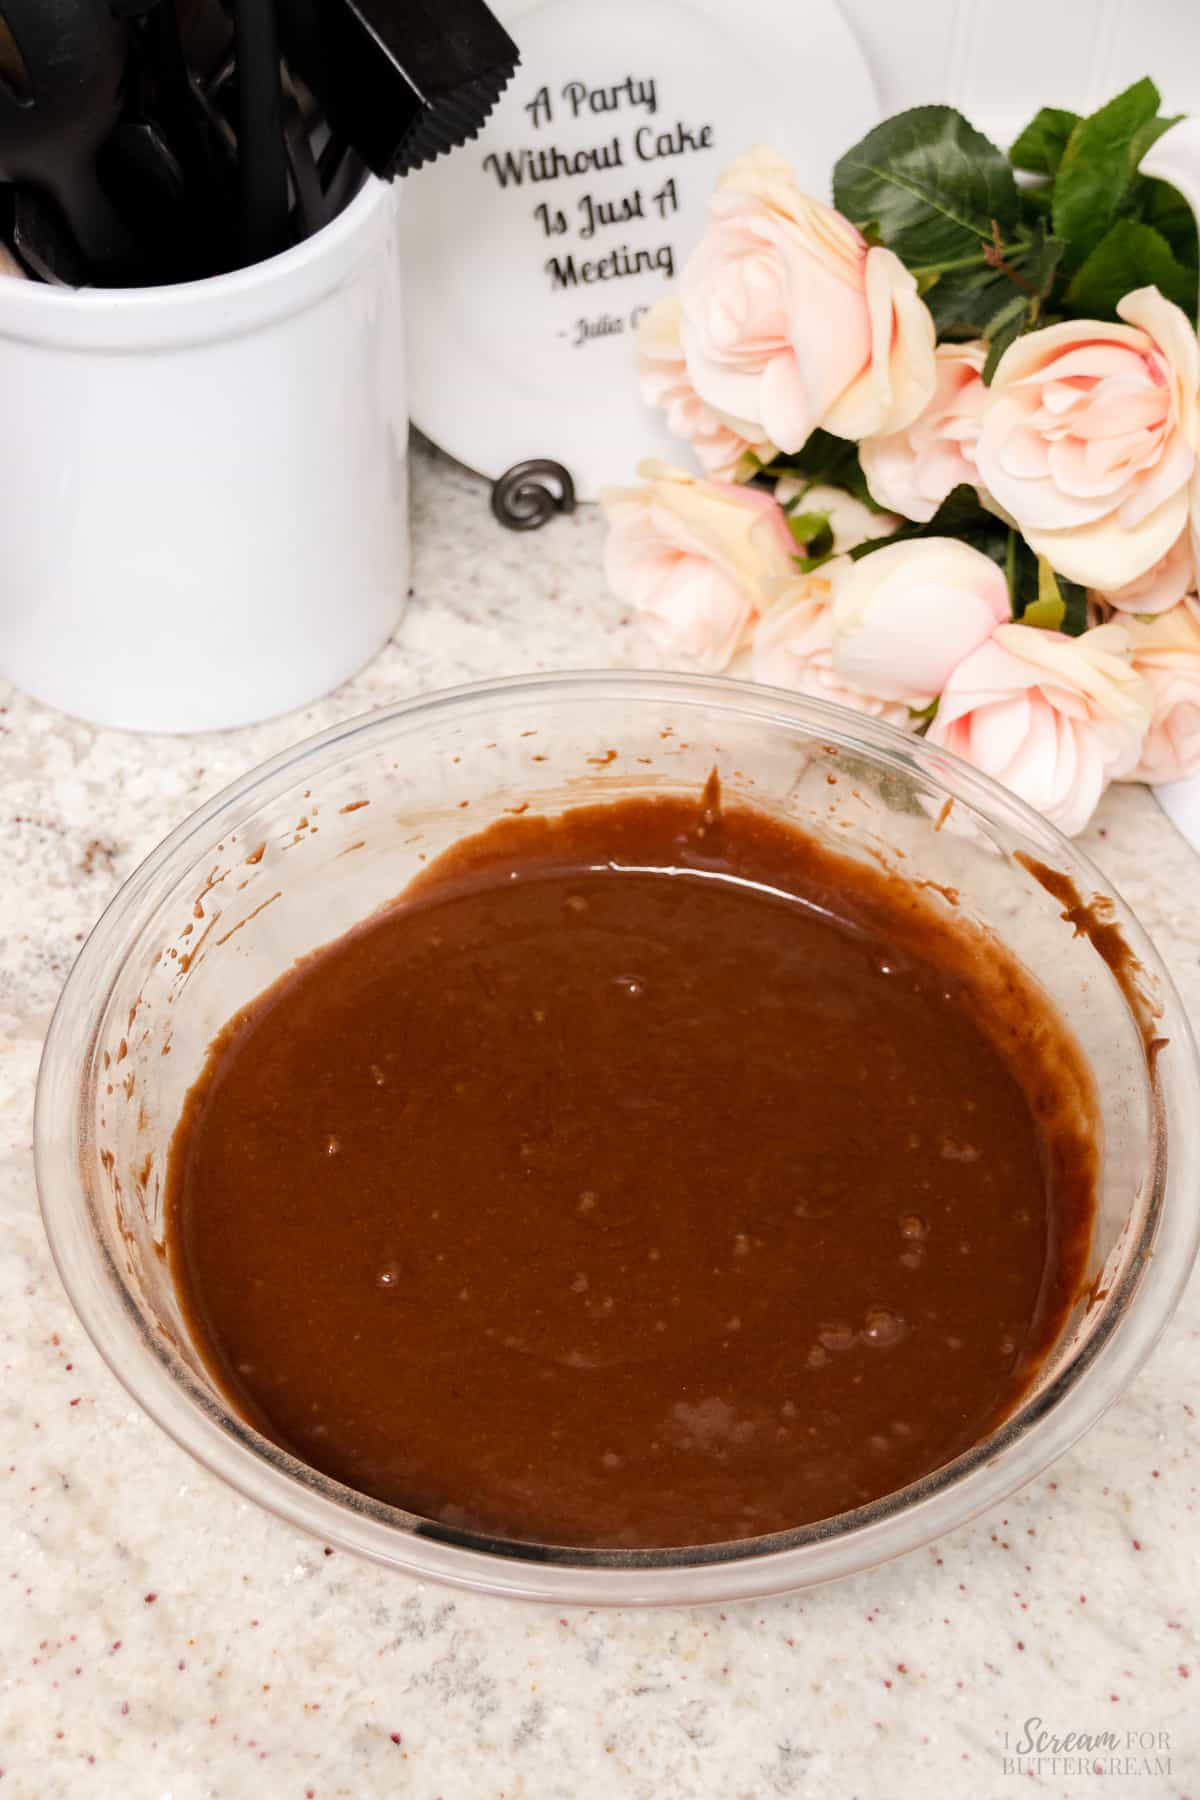 Mixed chocolate and coconut cake batter in a glass mixing bowl.